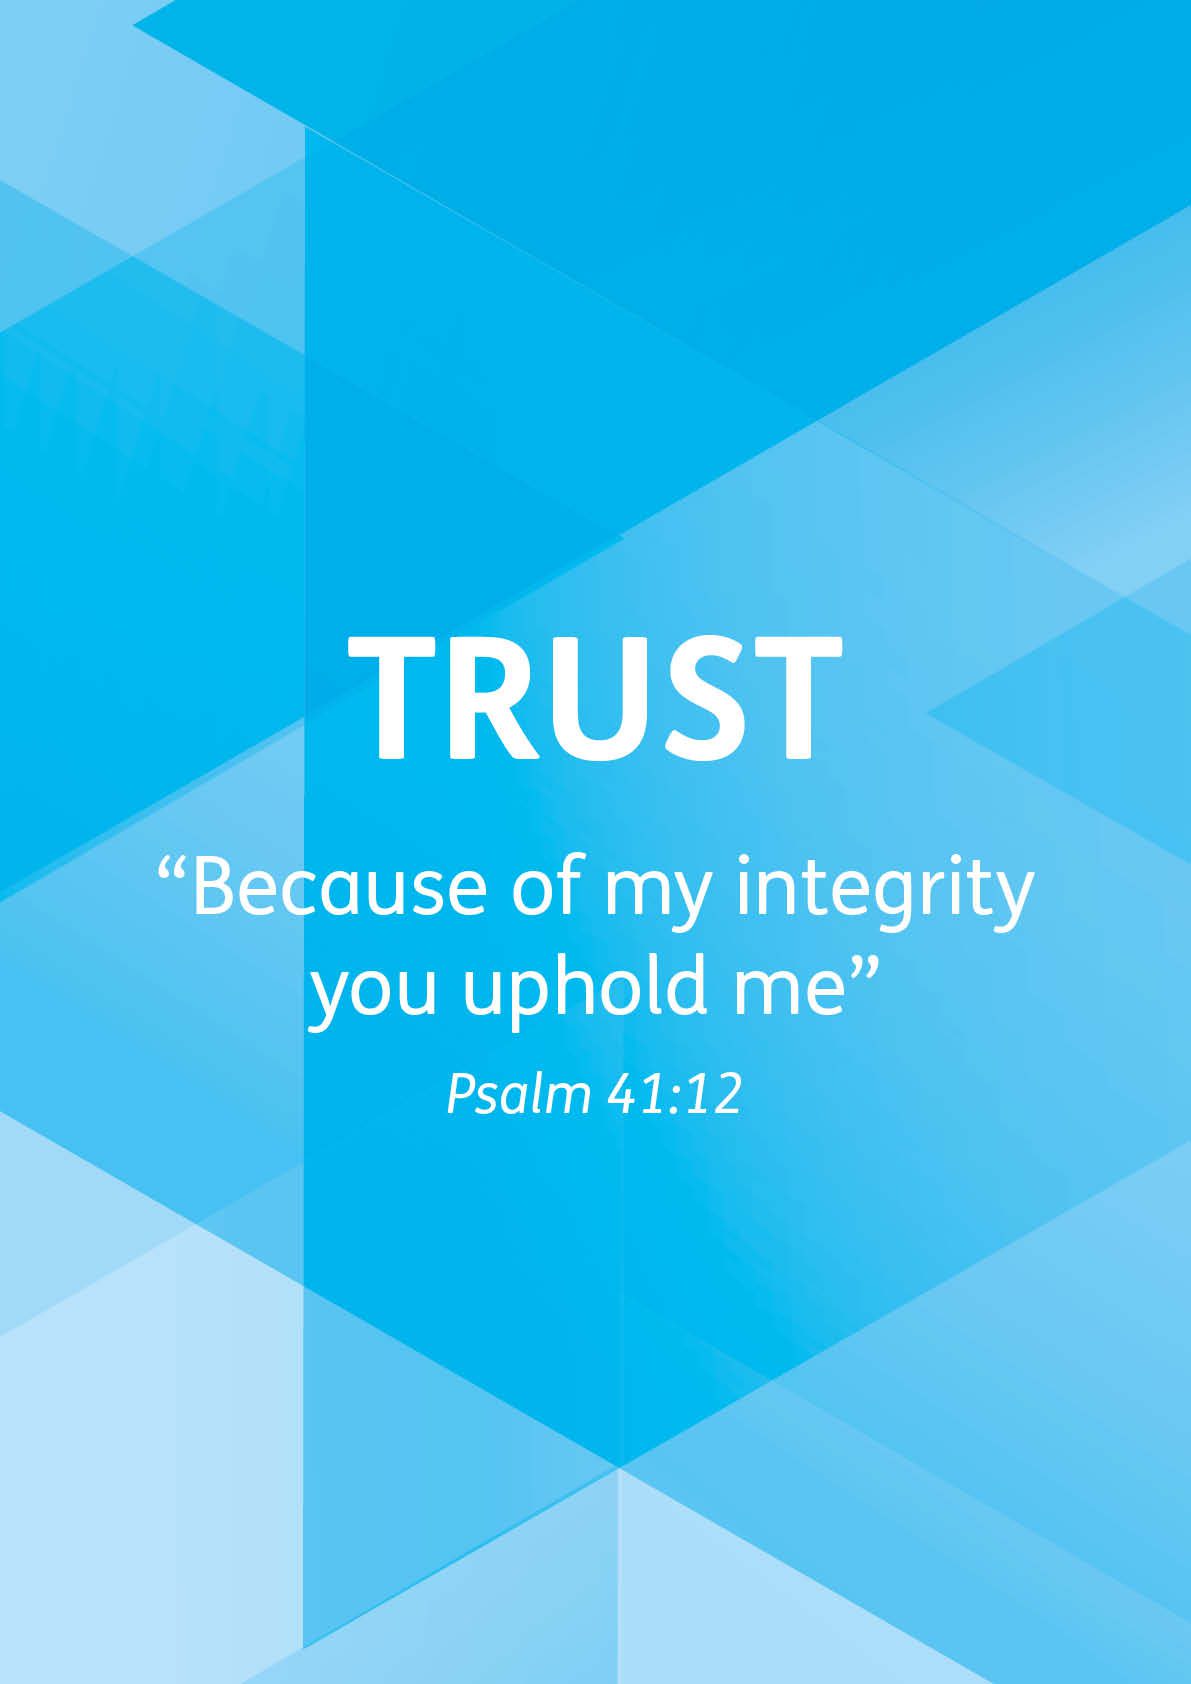 Trust. “Because of my integrity you uphold me” Psalm 41:12